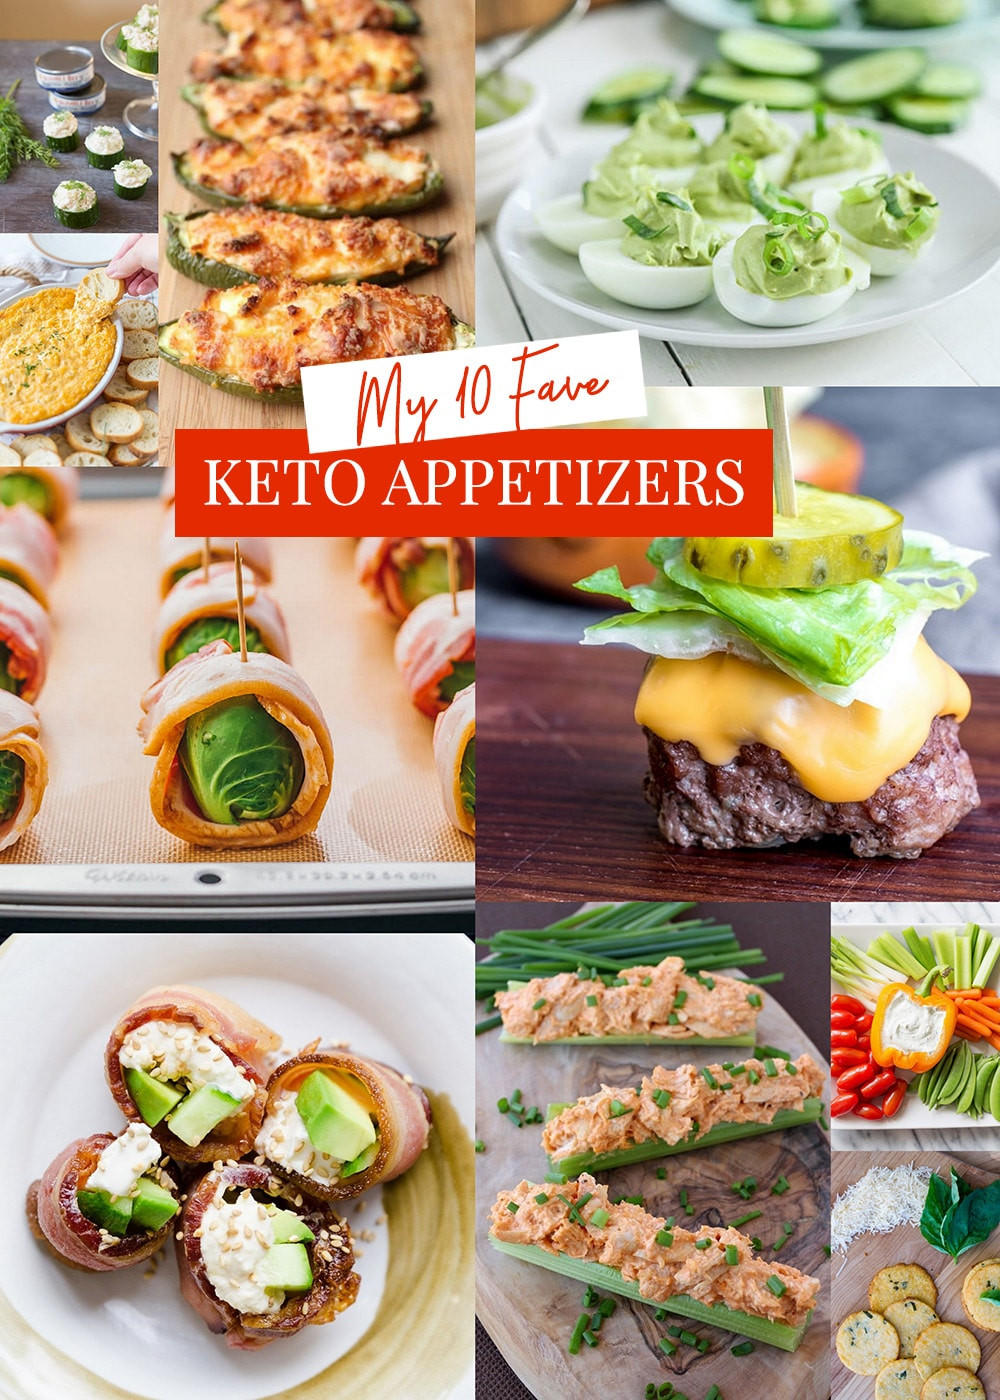 Keto Diet Appetizers
 Keto Appetizers Top 10 Low Carb Party Foods